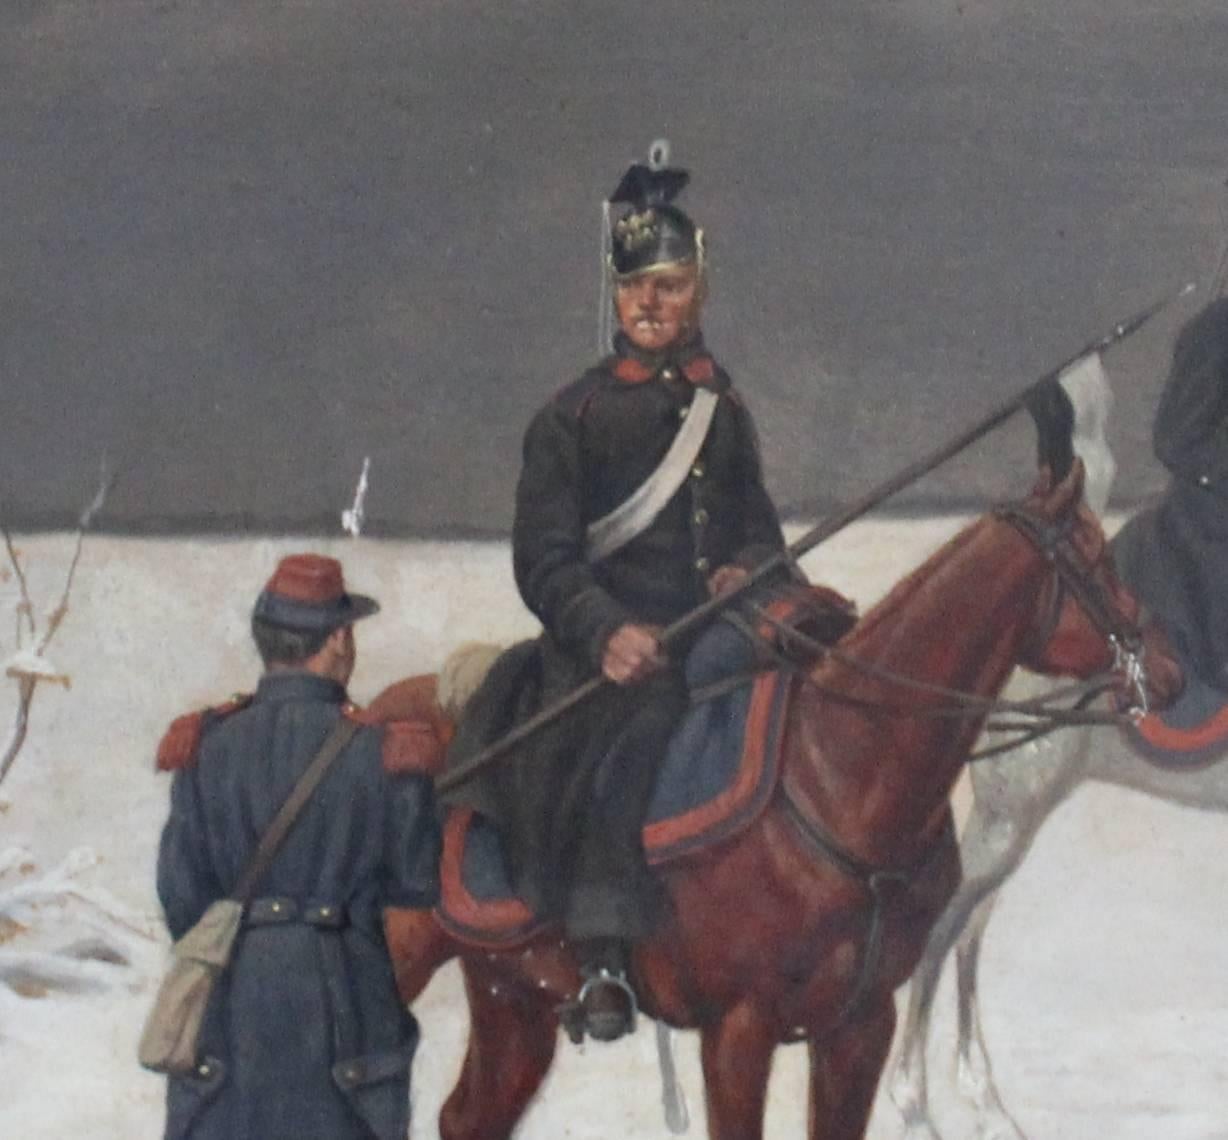 Pair of Christian Sell oil paintings.

Christian Sell (German 1831-1883).

These paintings depict military scenes of snow-covered landscapes with Prussian infantrymen. The artist is known for his historic soldier and battle paintings. 

Each